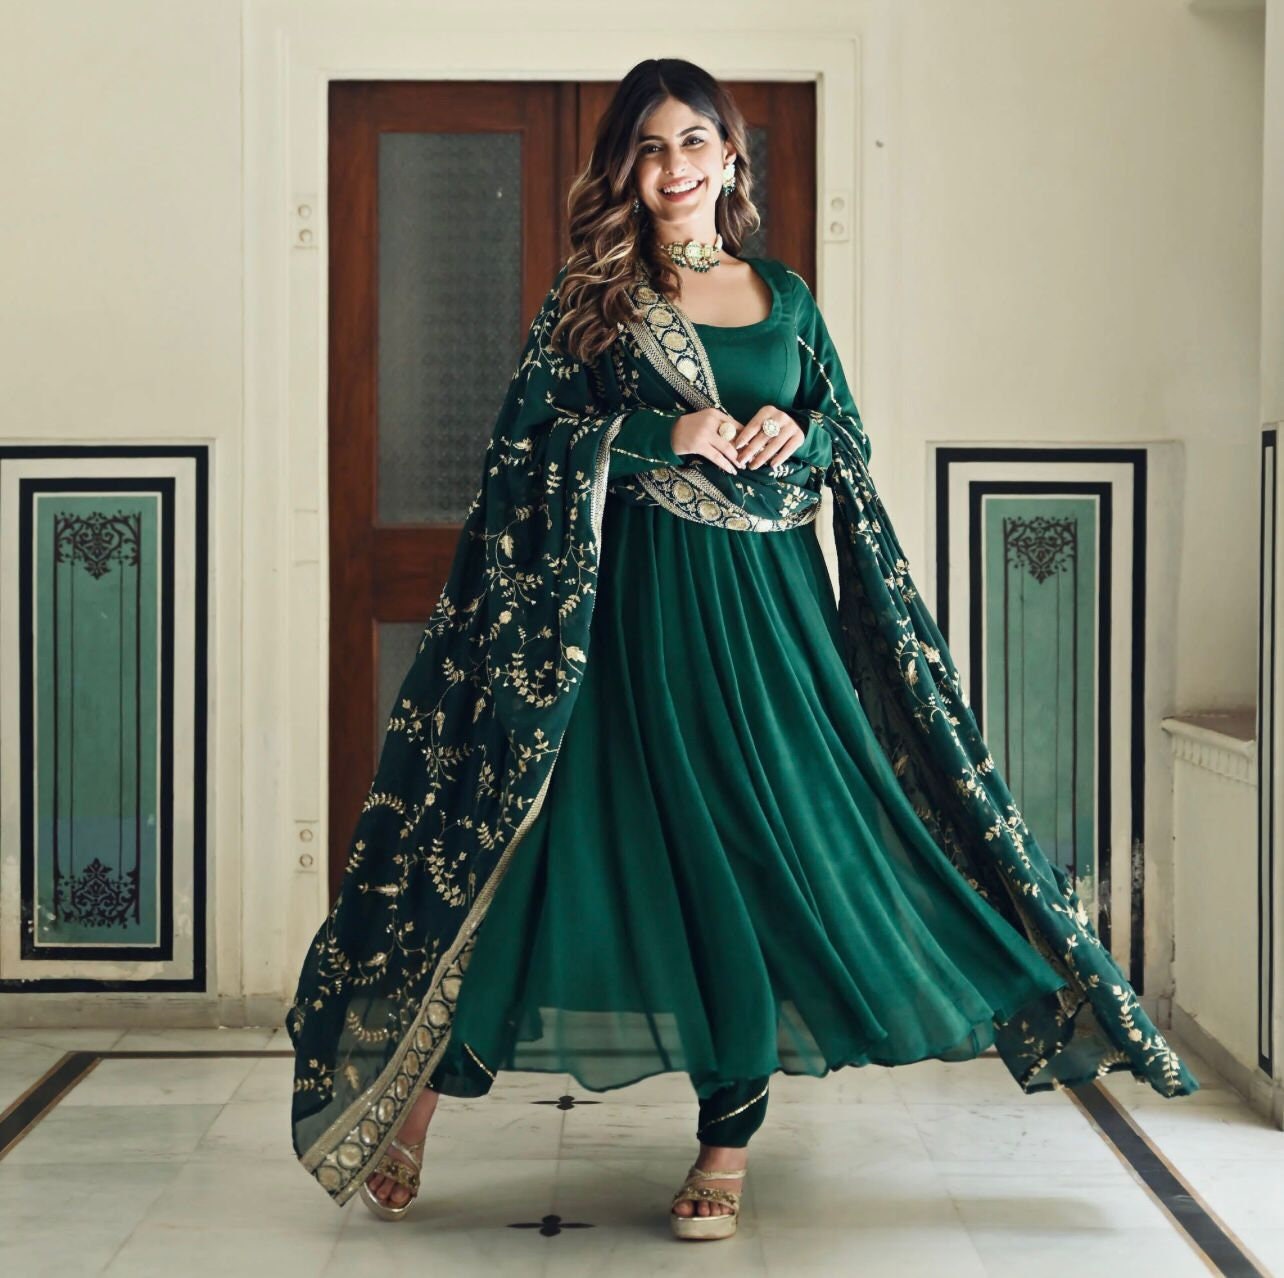 RF - Green color Georgette Gown Dress. - New In - Indian